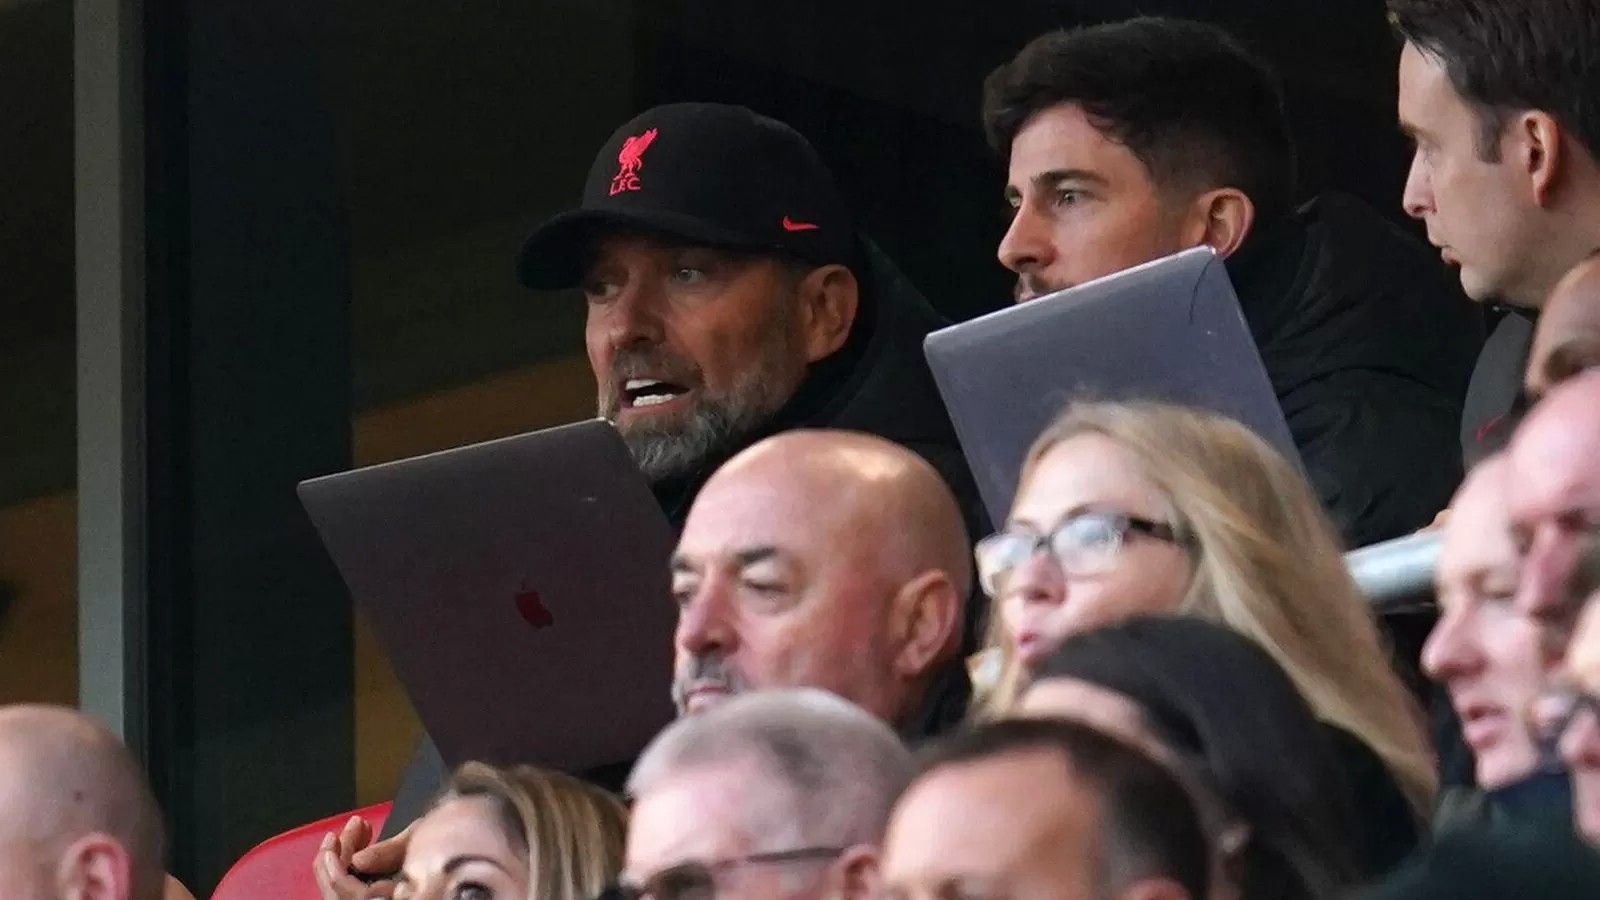 Losing their ‘laptop gurus’ hints at deeper problems at Liverpool…